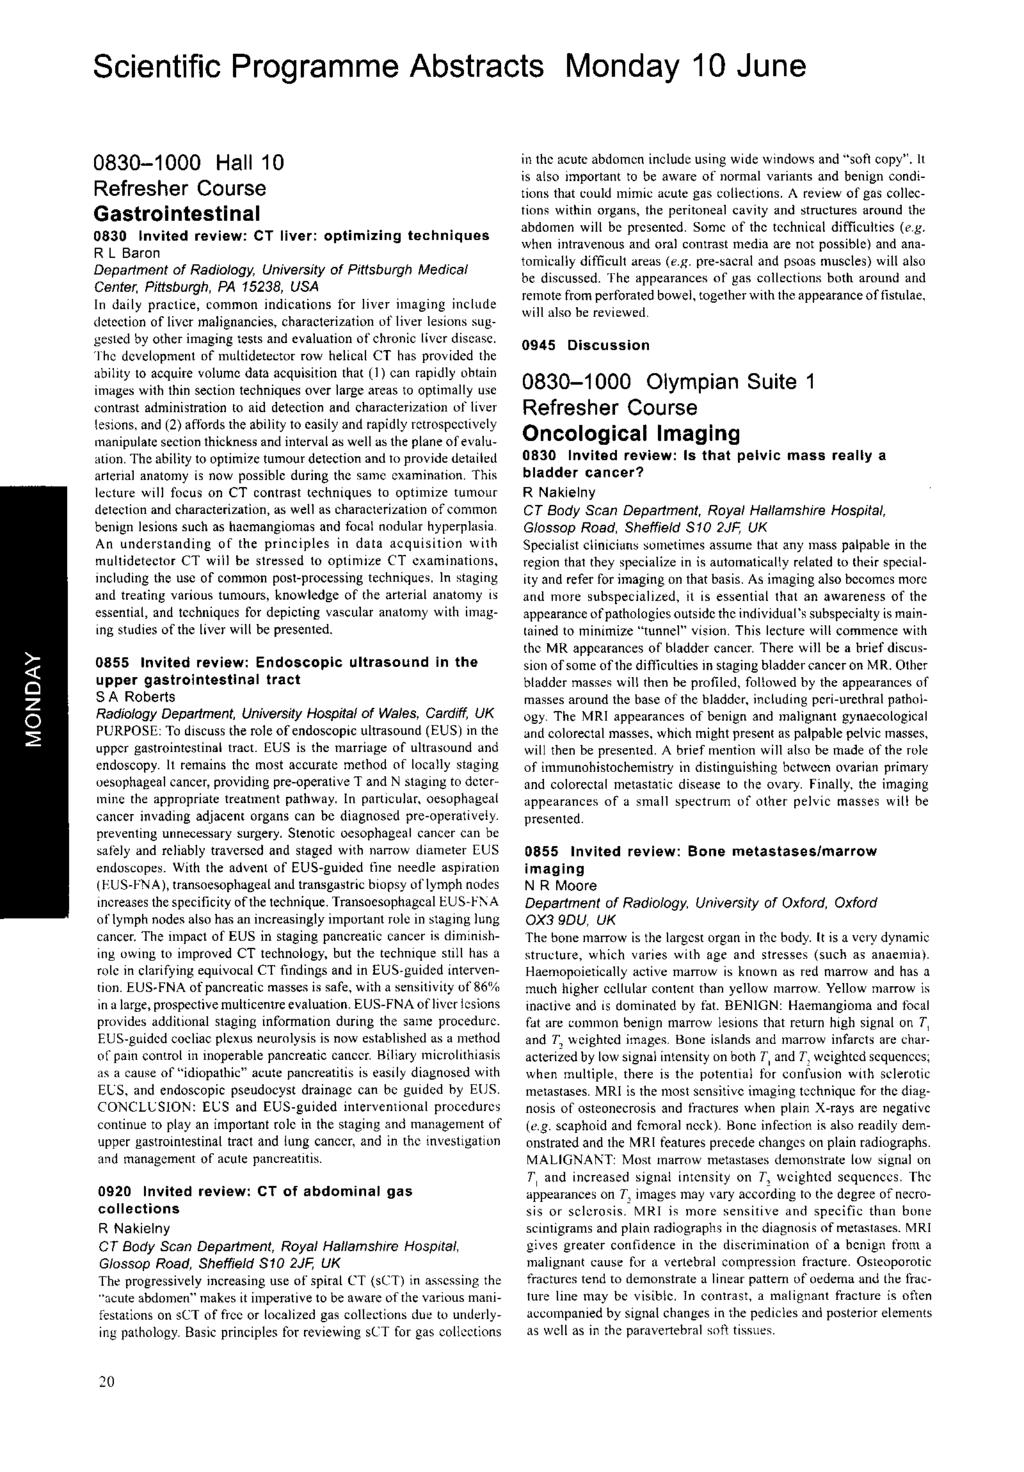 Scientific Programme Abstracts Monday 0 June 0830-000 Hall 0 Refresher Course Gastrointestinal 0830 Invited review: CT liver: optimizing techniques R L Baron Department of Radiology, University of